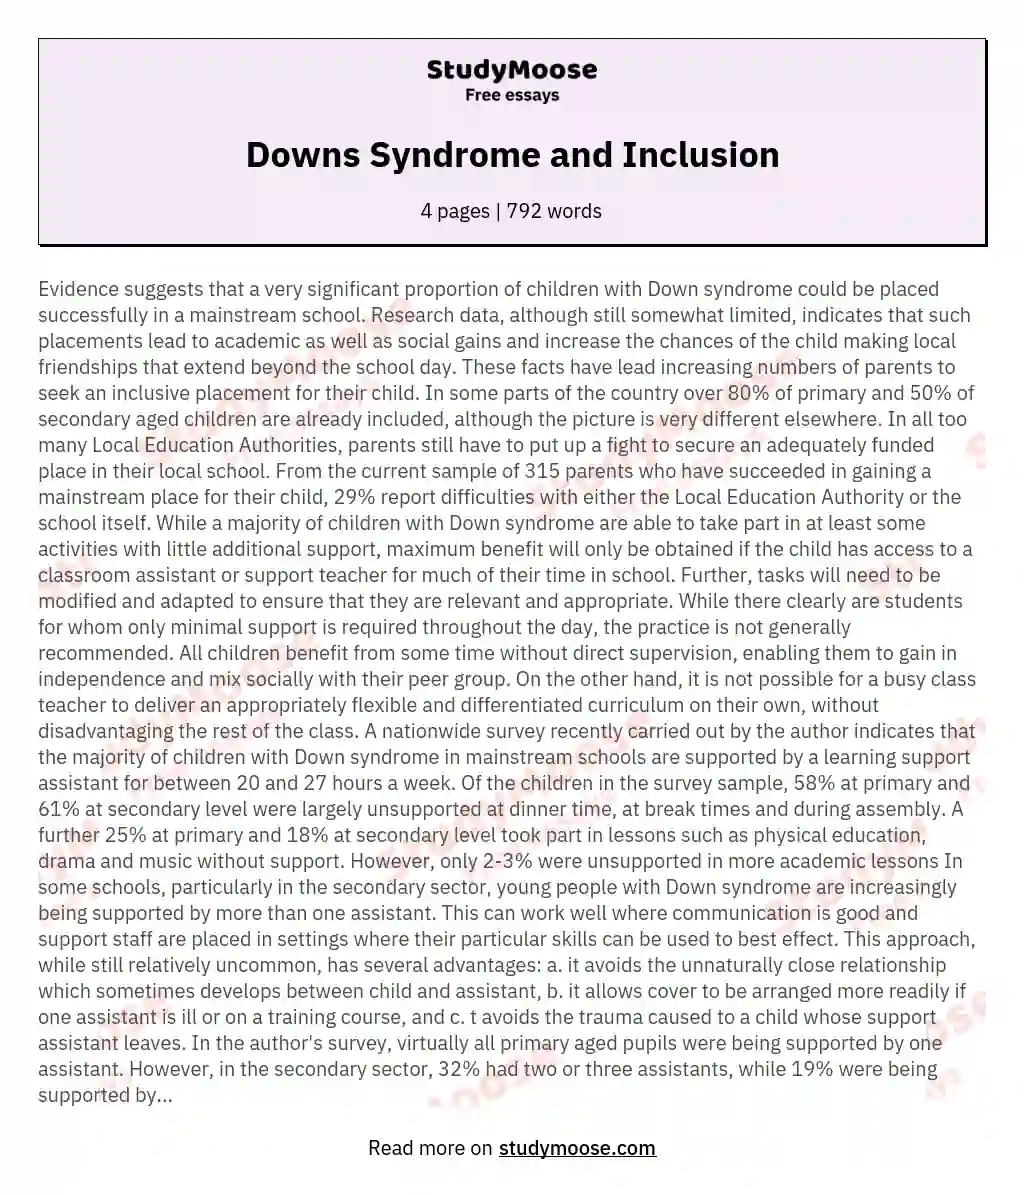 Downs Syndrome and Inclusion